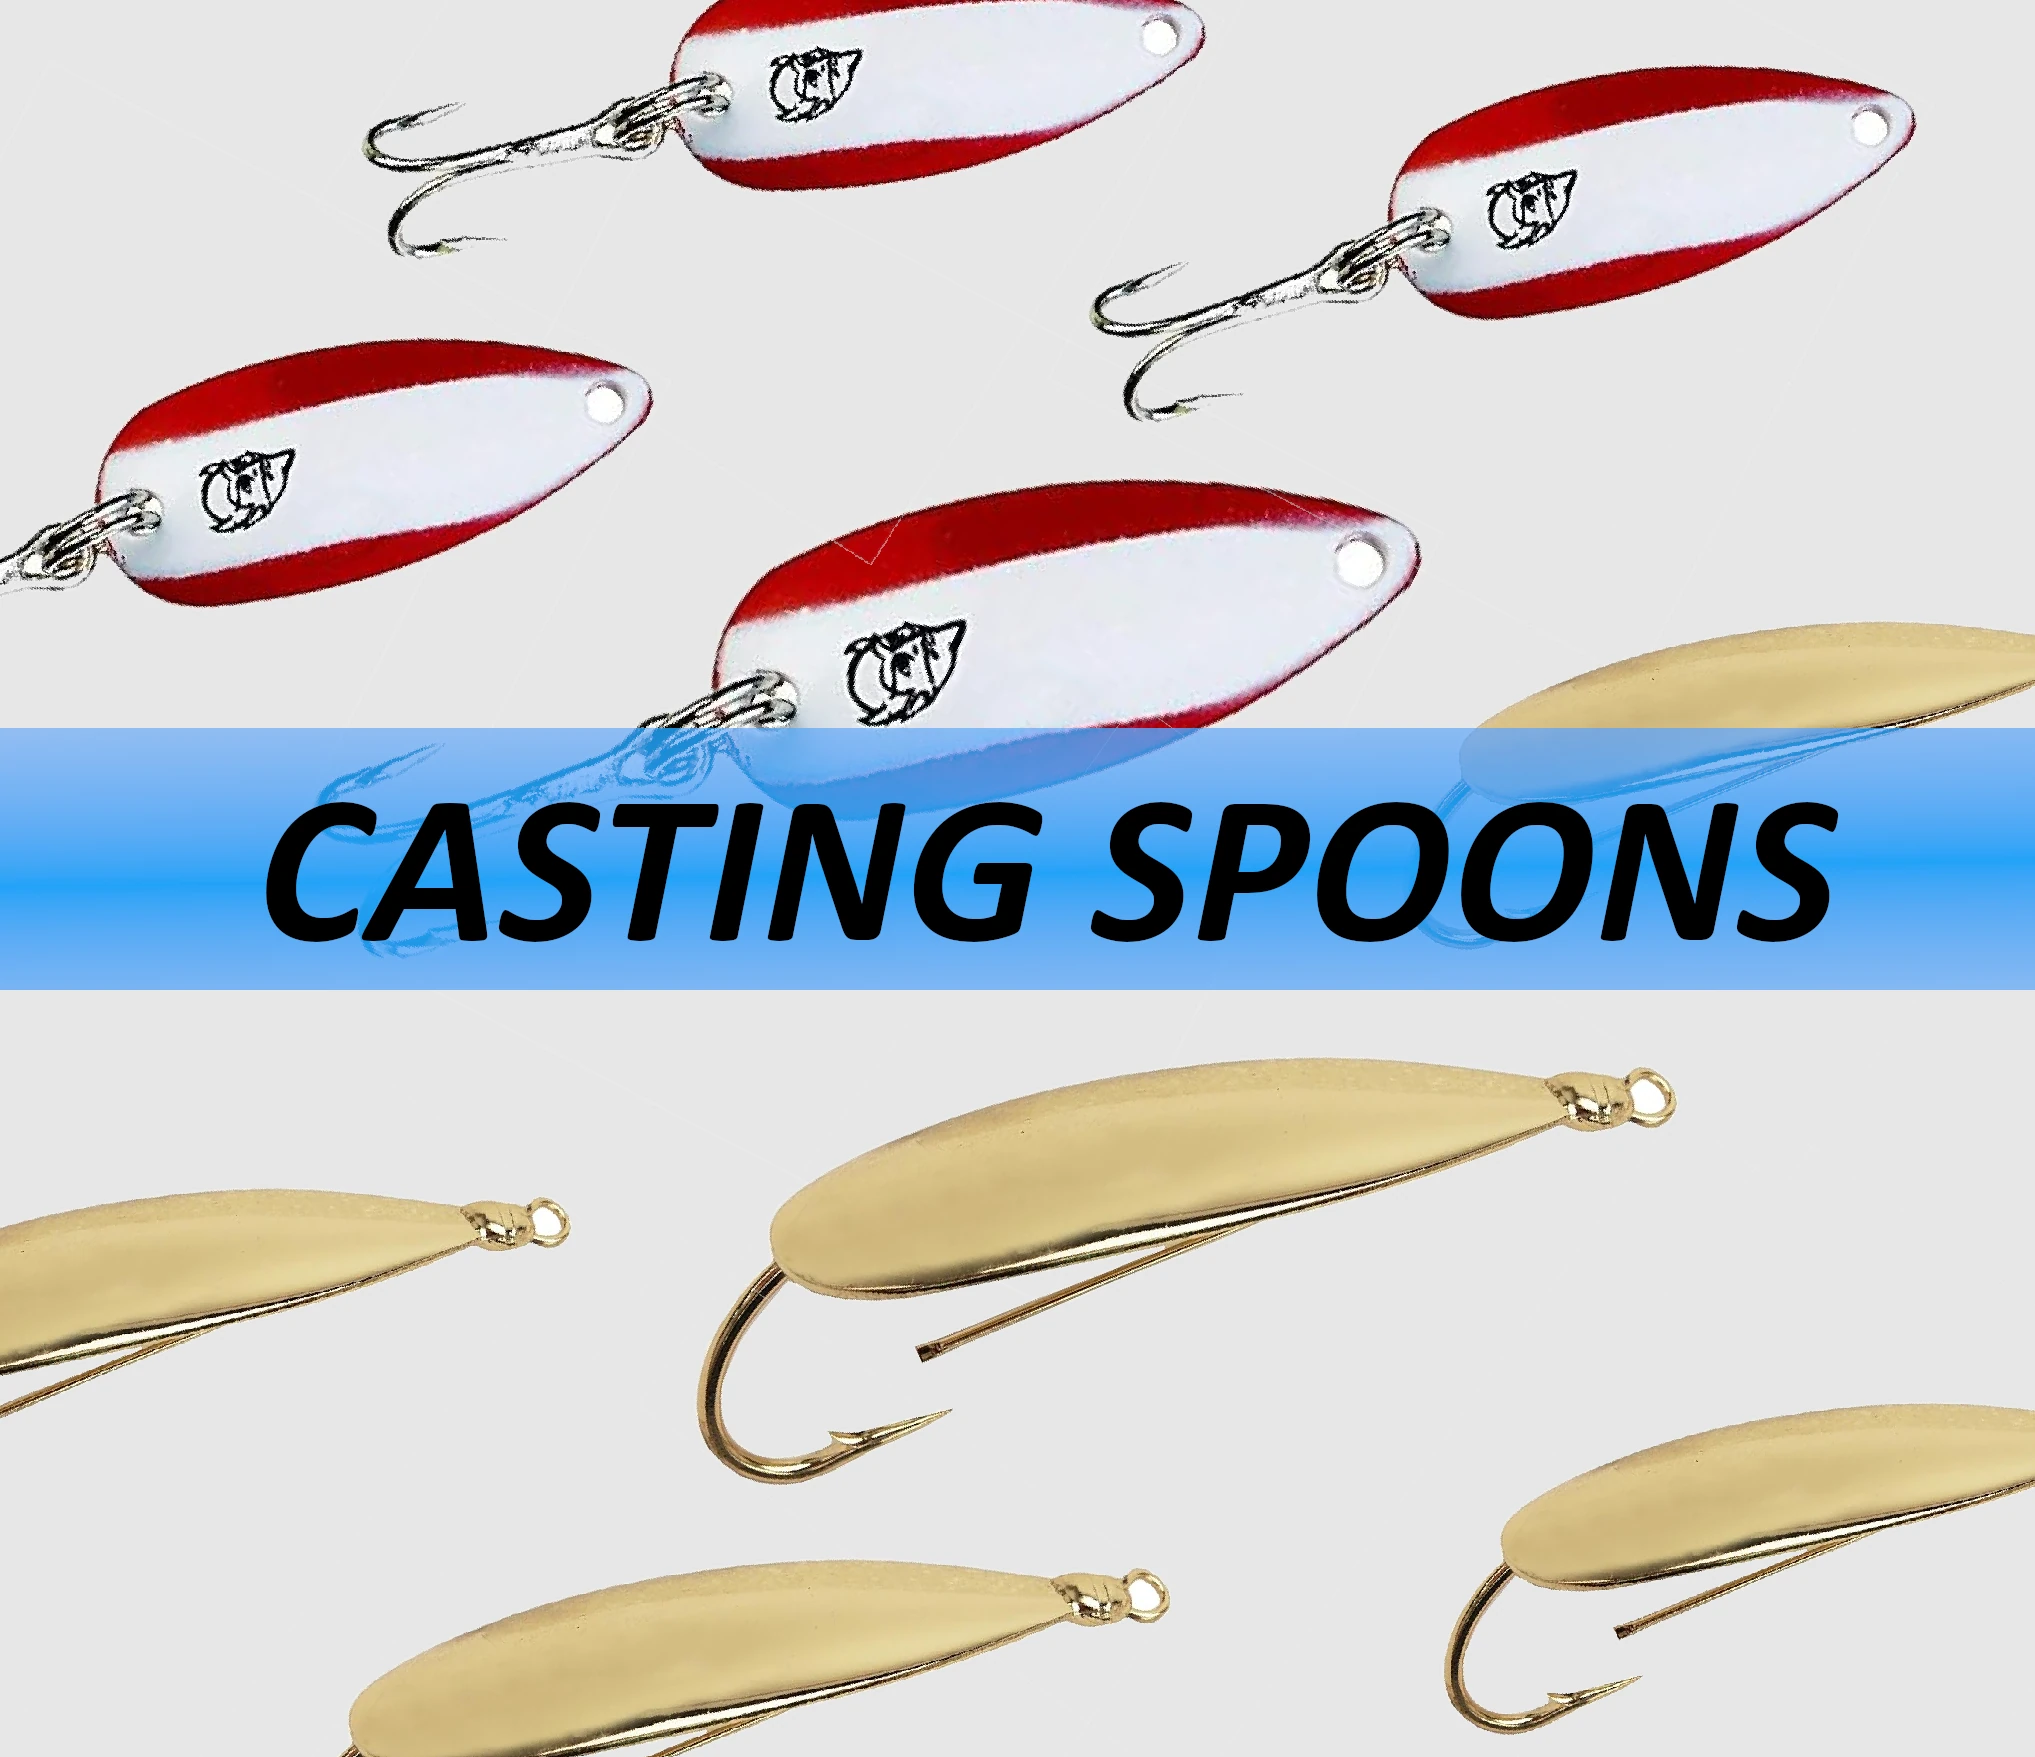 How to use casting spoons